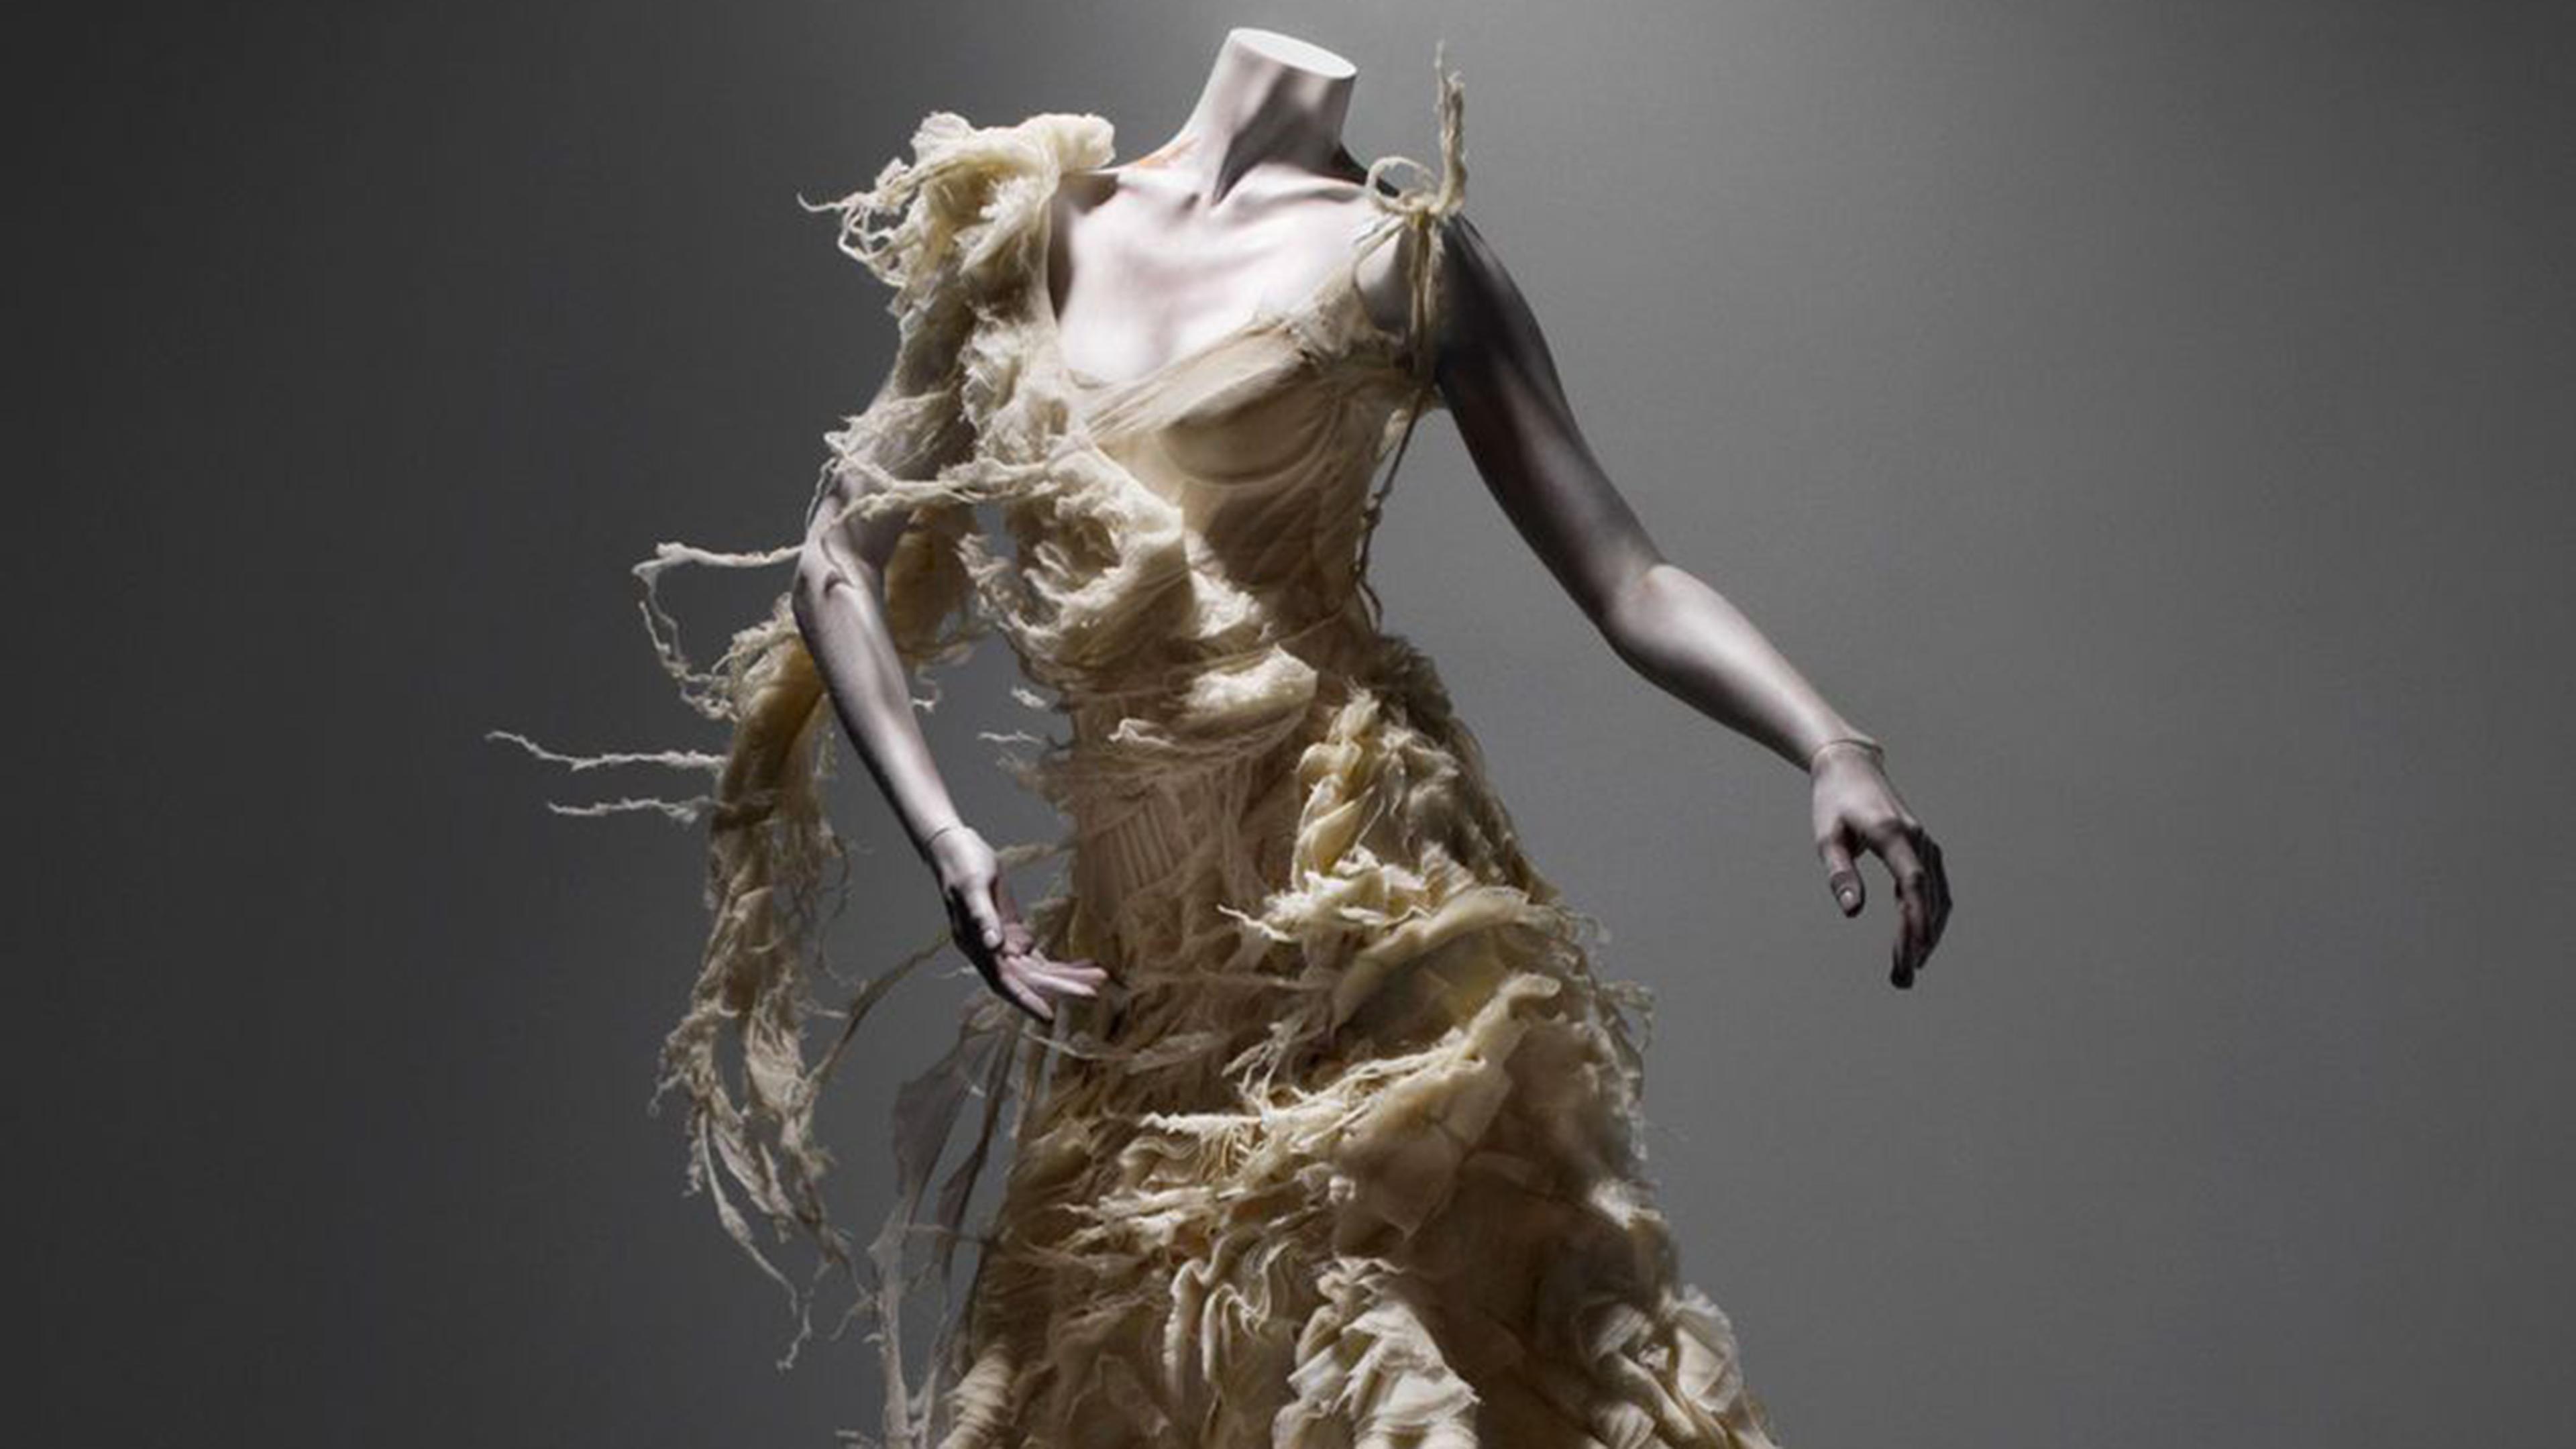 A couture gown by Alexander McQueen against a dark grey background